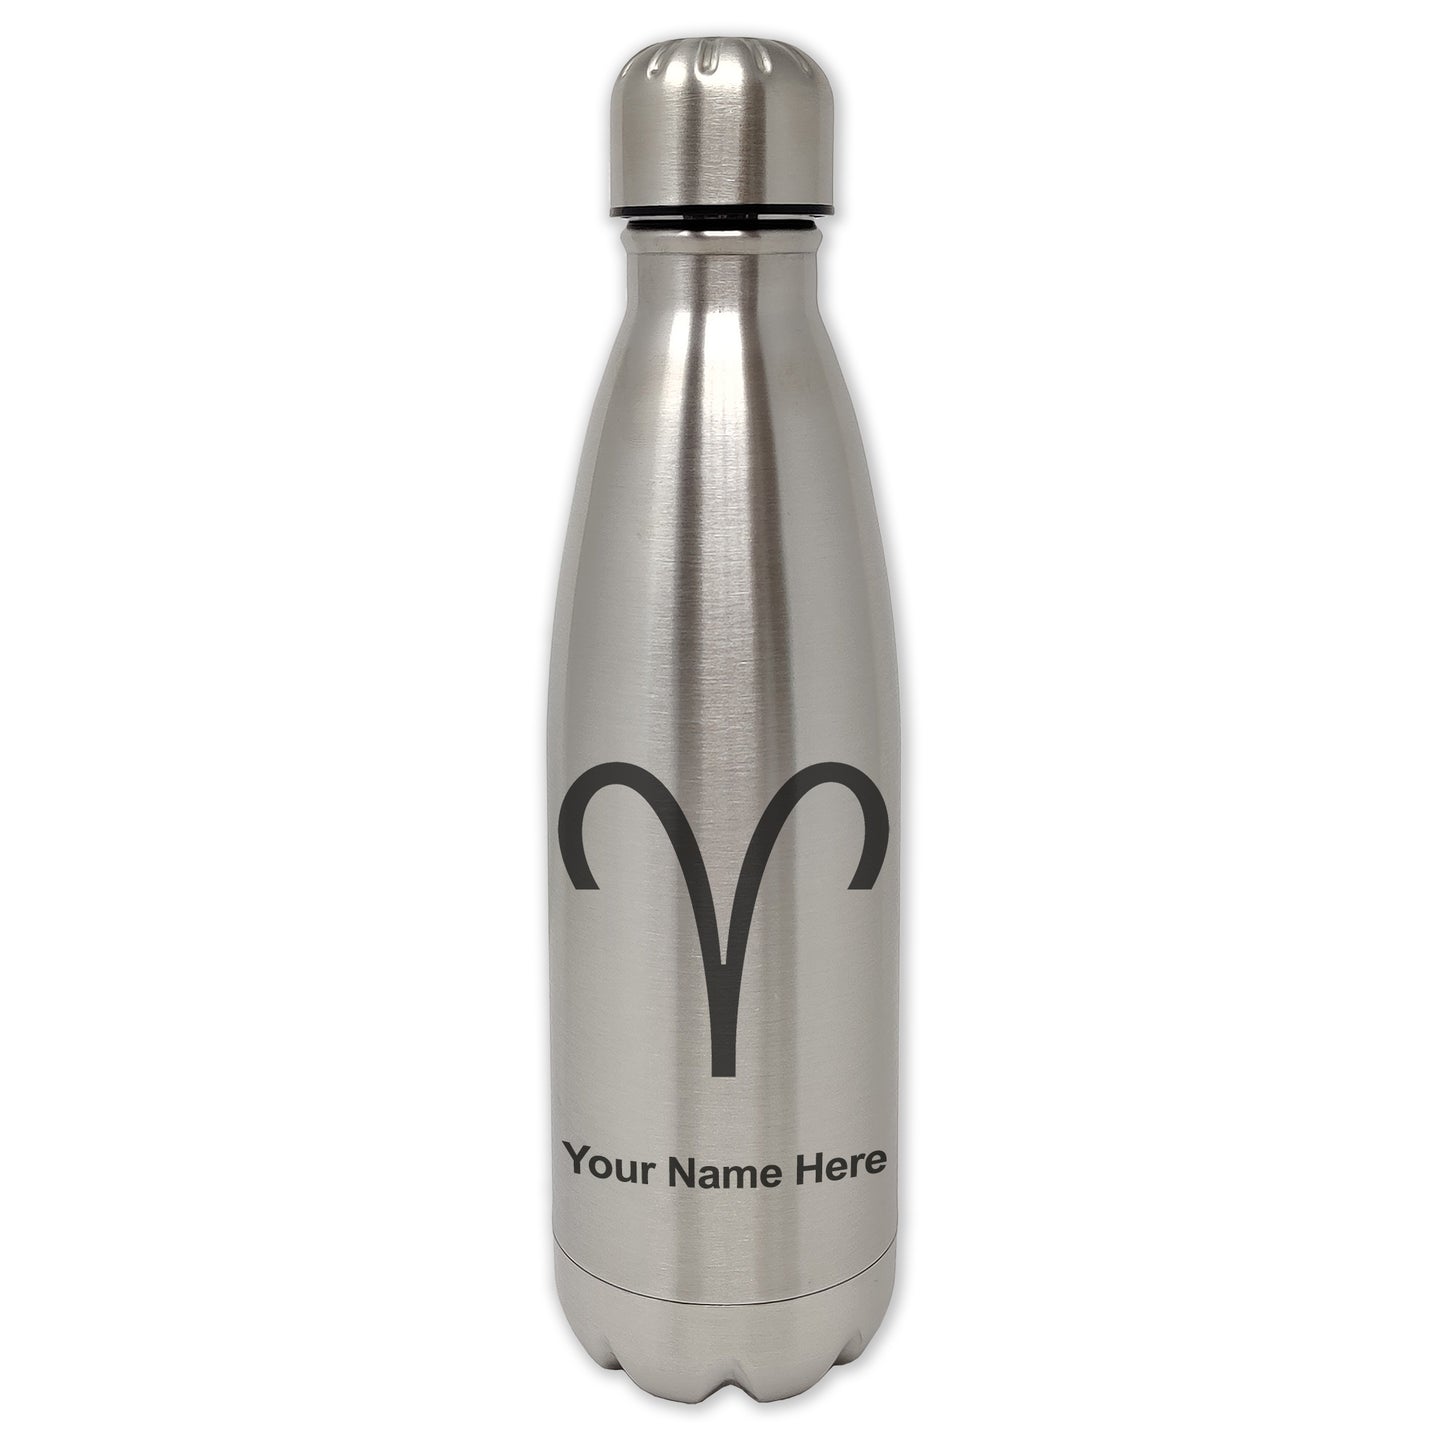 LaserGram Double Wall Water Bottle, Zodiac Sign Aries, Personalized Engraving Included